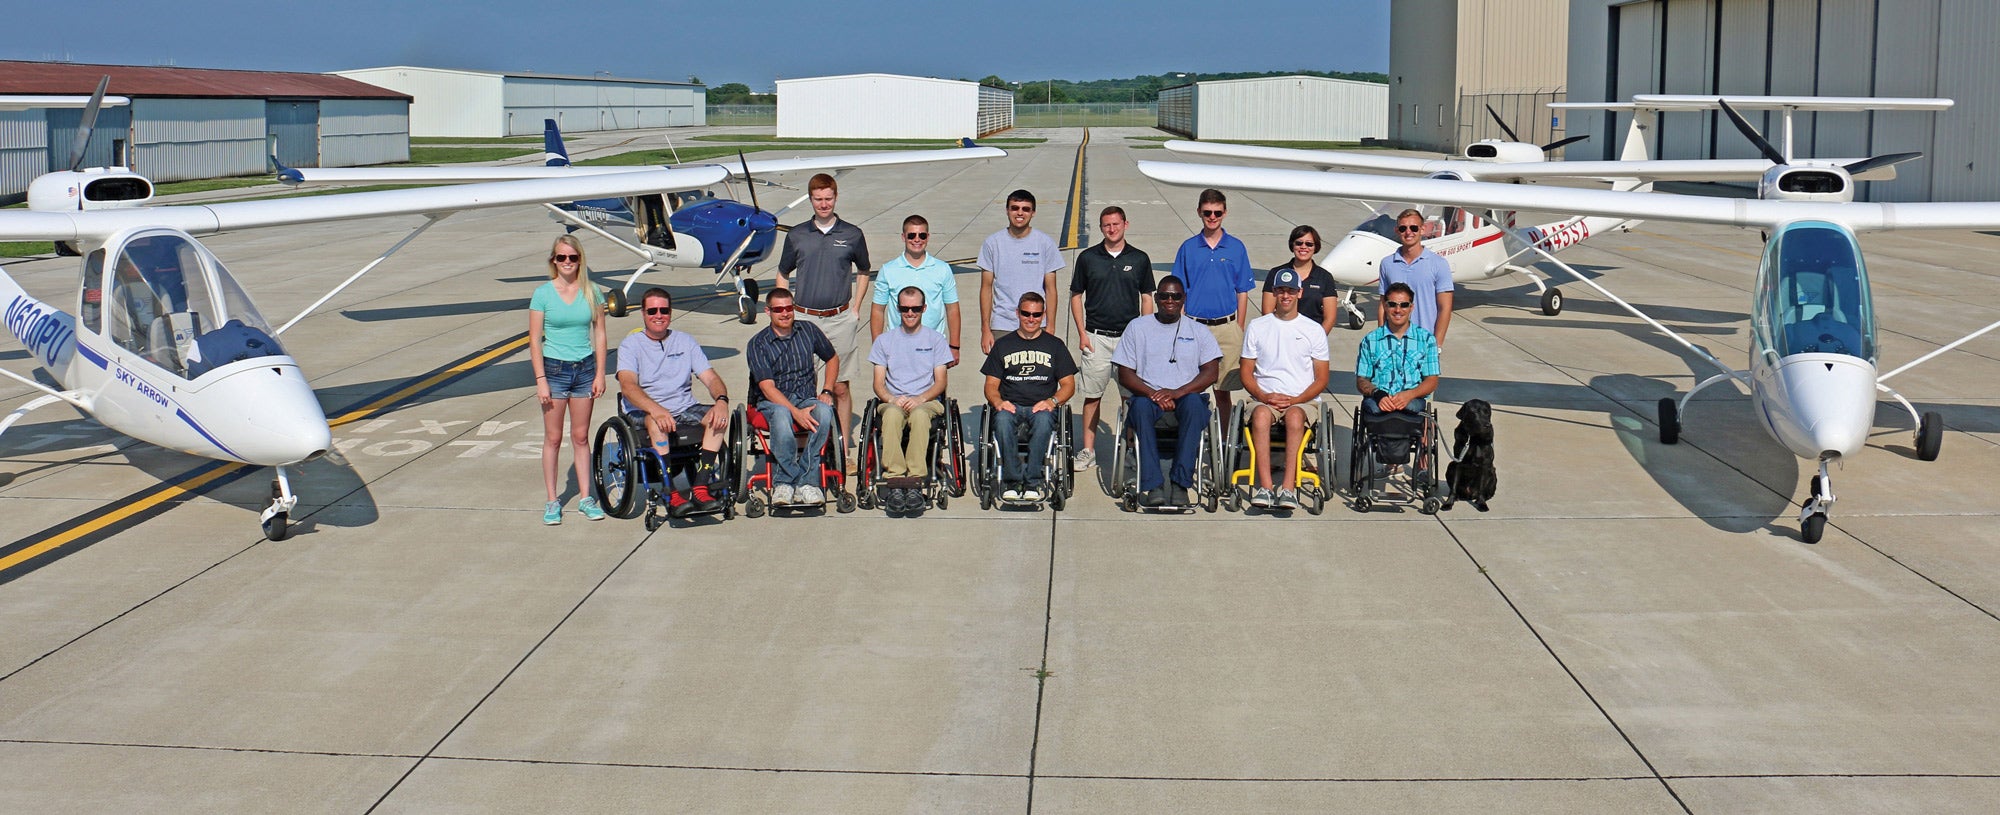 Able Flight training students and aircraft